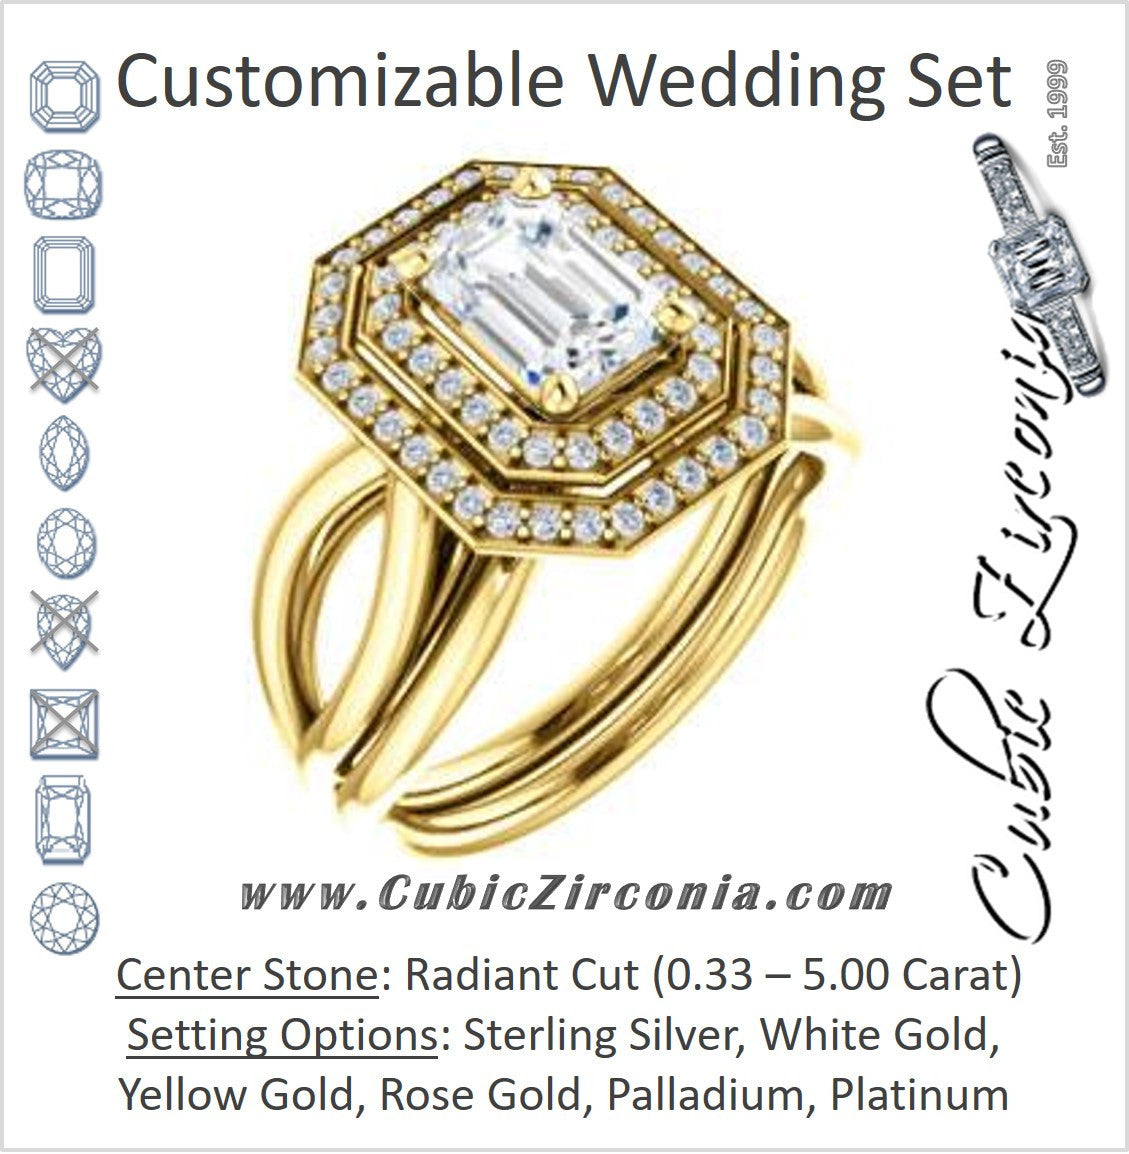 CZ Wedding Set, featuring The Magda Lesli engagement ring (Customizable Double-Halo Style Radiant Cut with Curving Split Band)